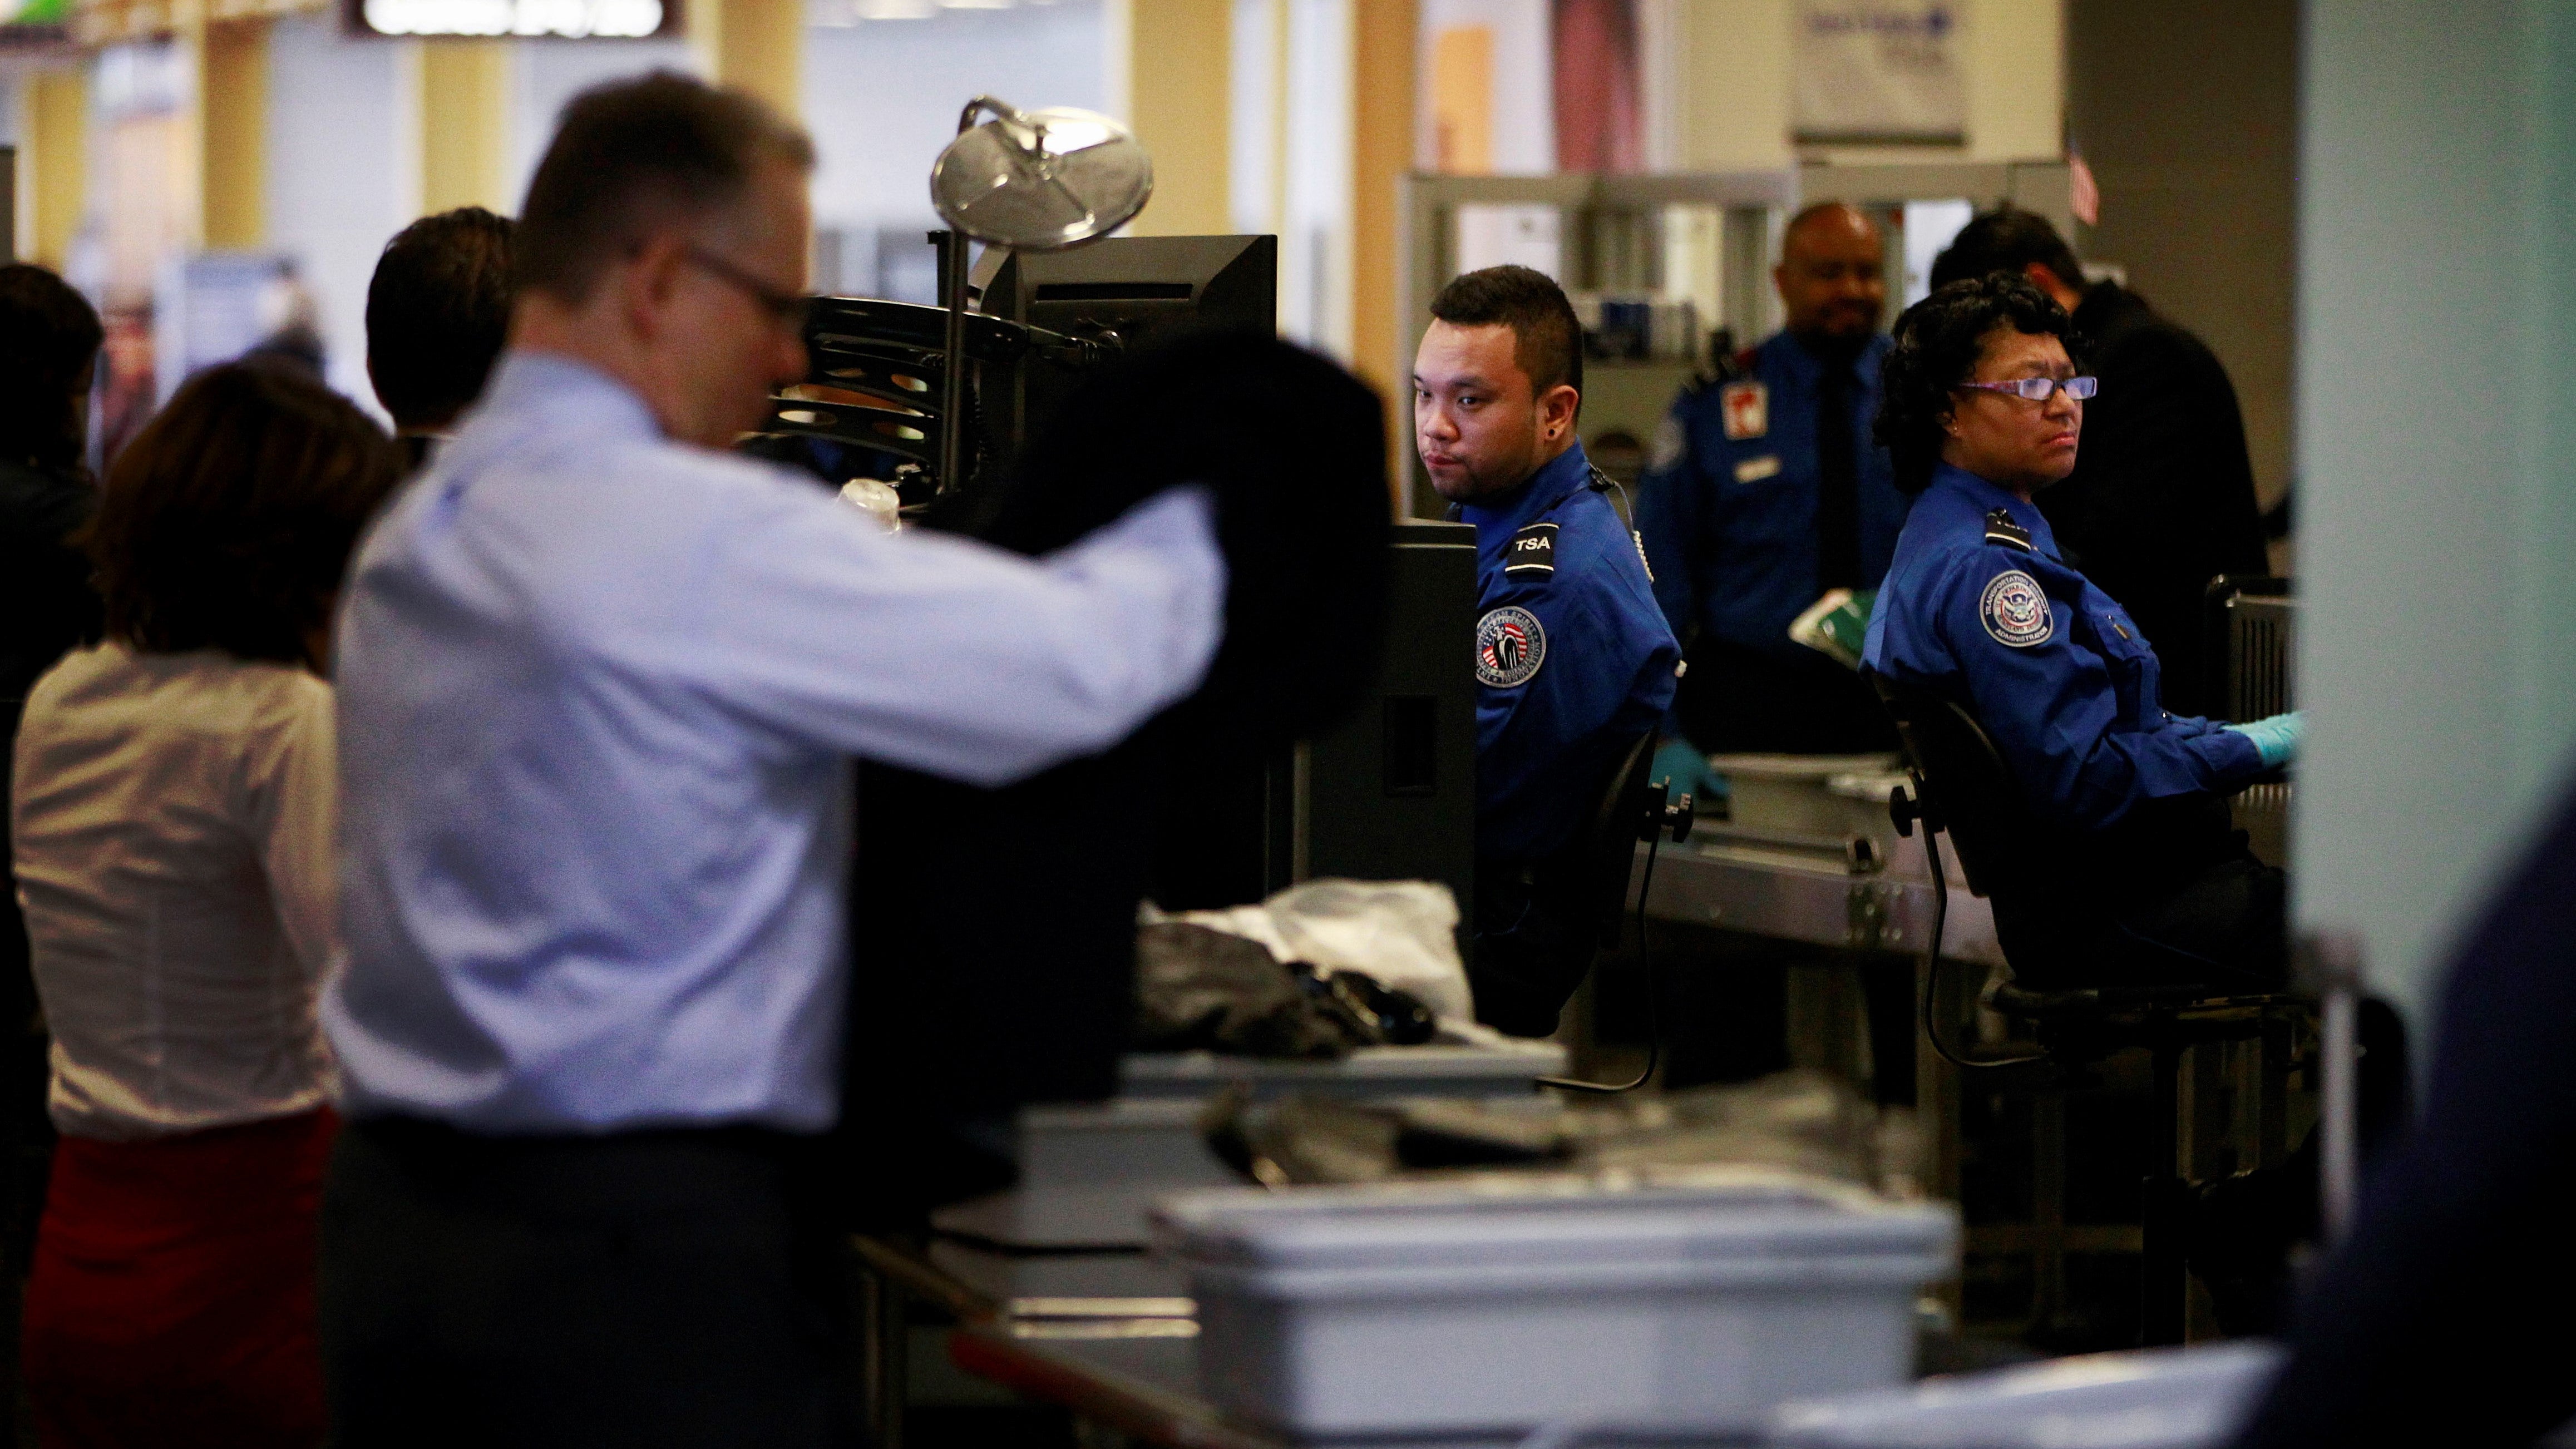 Start Pulling Out Your Tablets And E-Readers When You Go Through US Airport Security